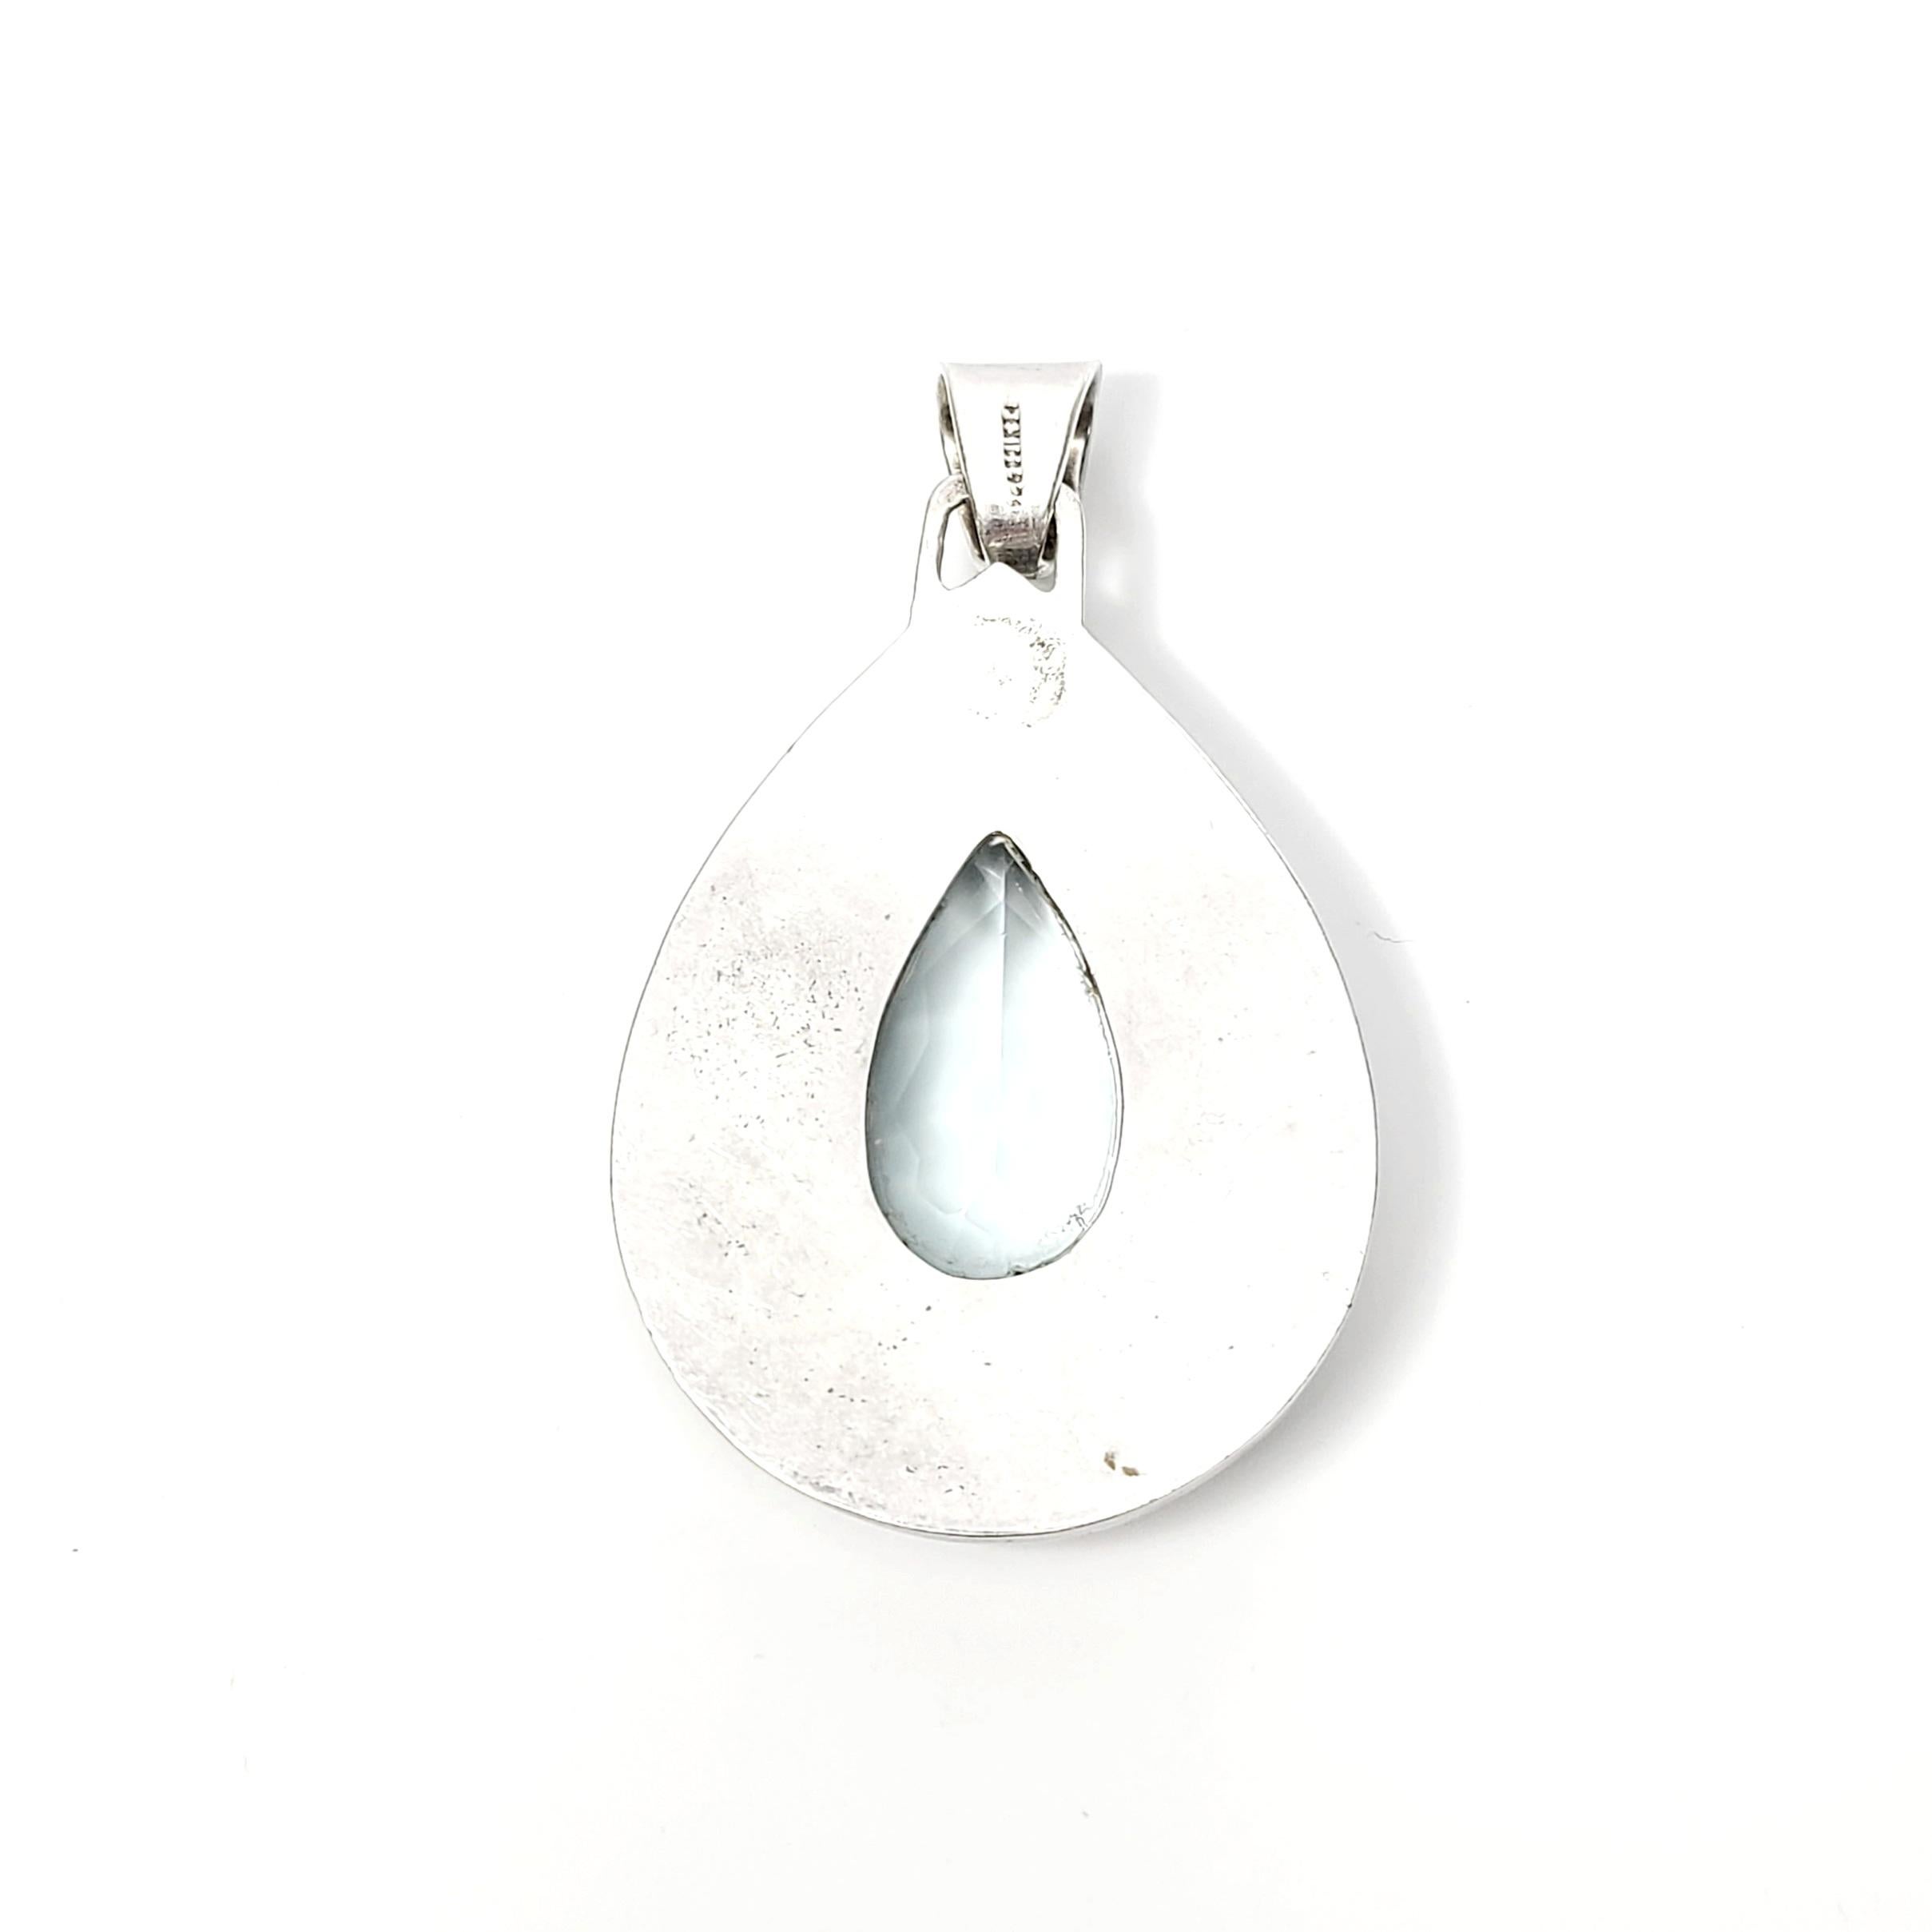 Mexican sterling silver and aquamarine colored glass teardrop pendant.

This handcrafted artisan piece is large and substantial featuring a large faceted glass teardrop stone in a light aquamarine color bezel set in a teardrop shape frame with a